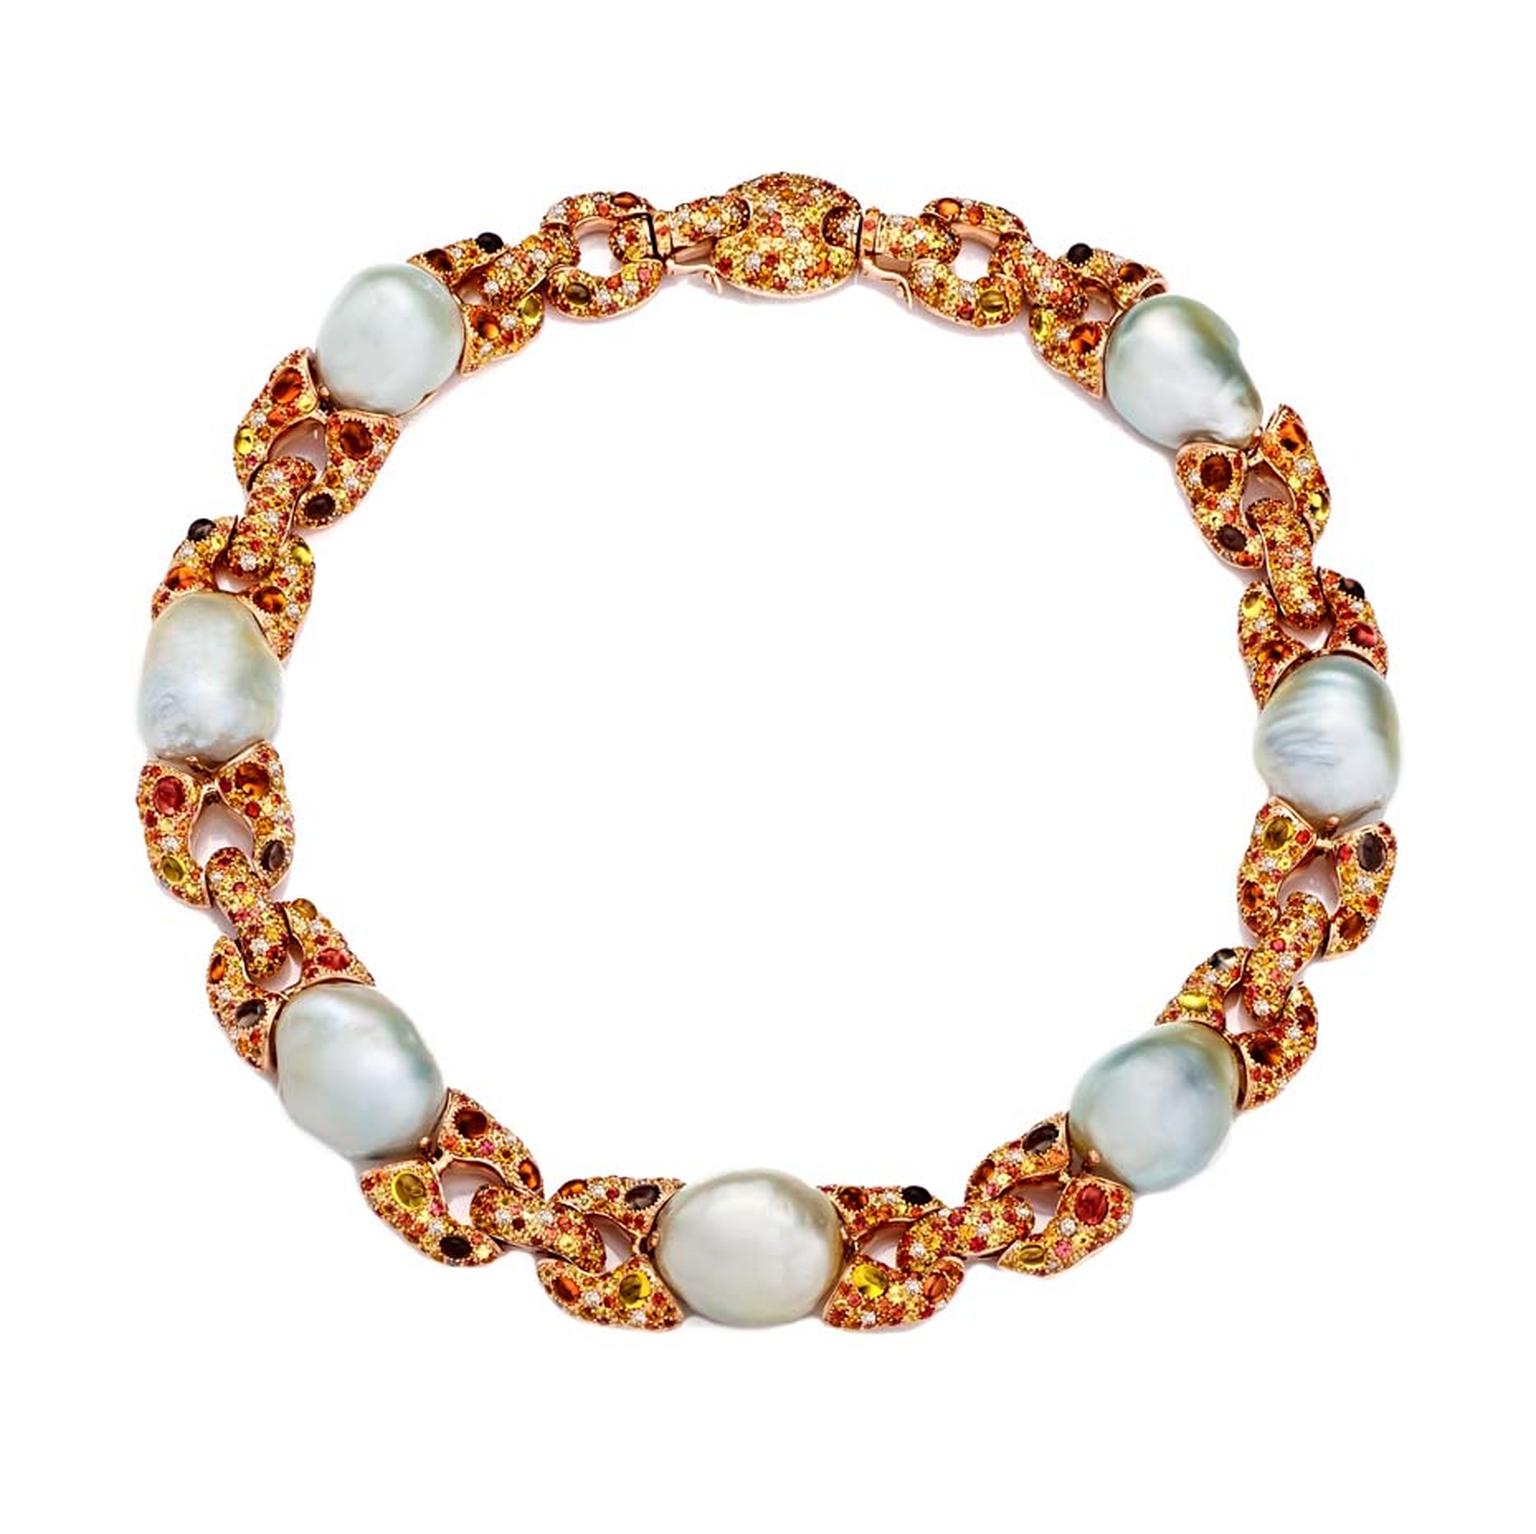 Margot McKinney luminescent gem-set collier with Baroque South Sea pearls.